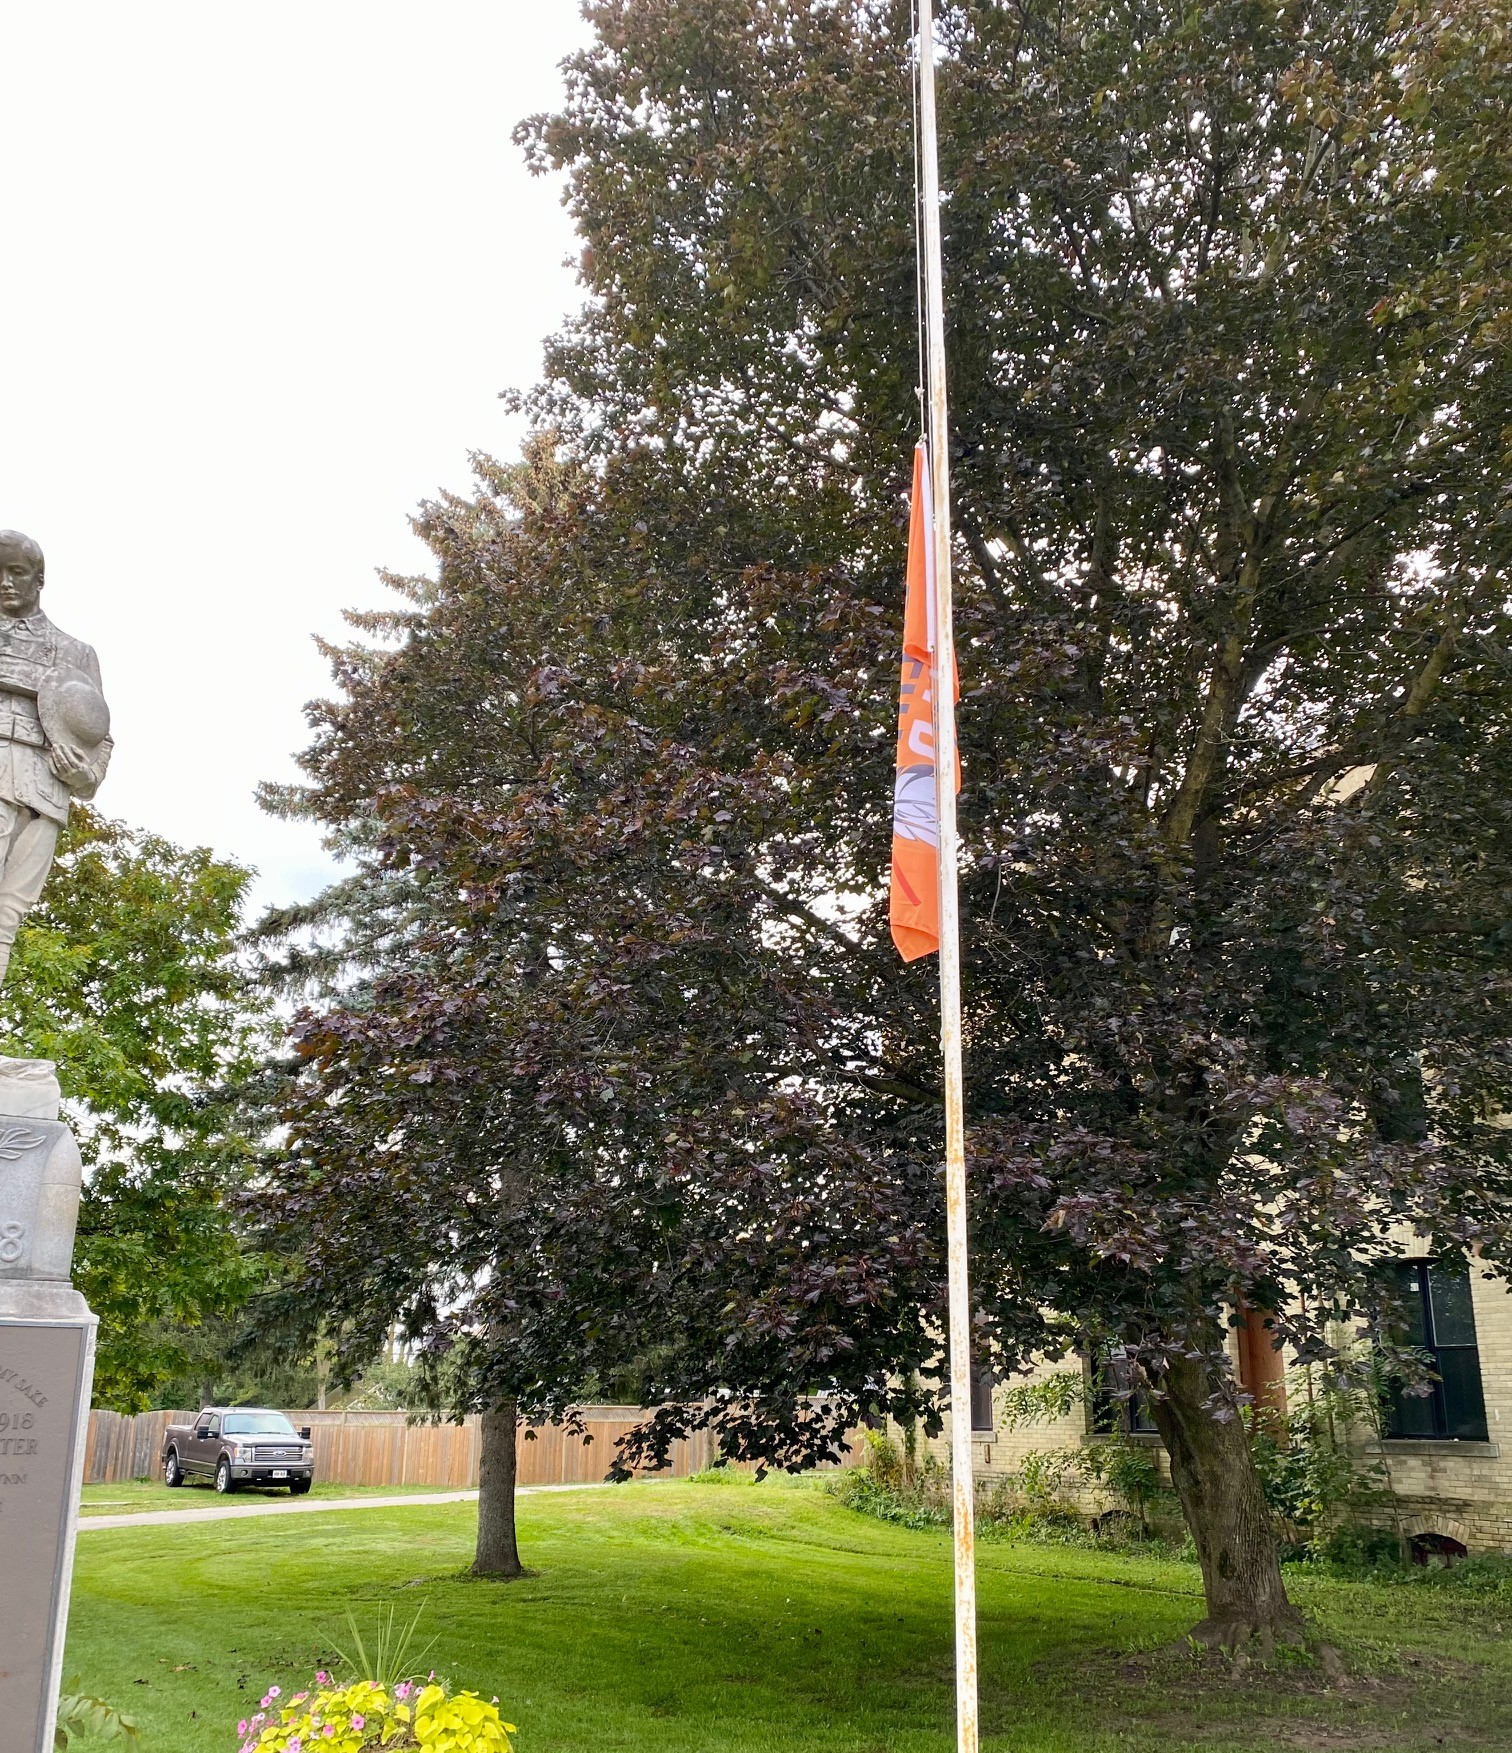 The orange Every Child Matters flag is flown at half mast in the foreground, with a cenotaph statue to the left and a large red maple in the background